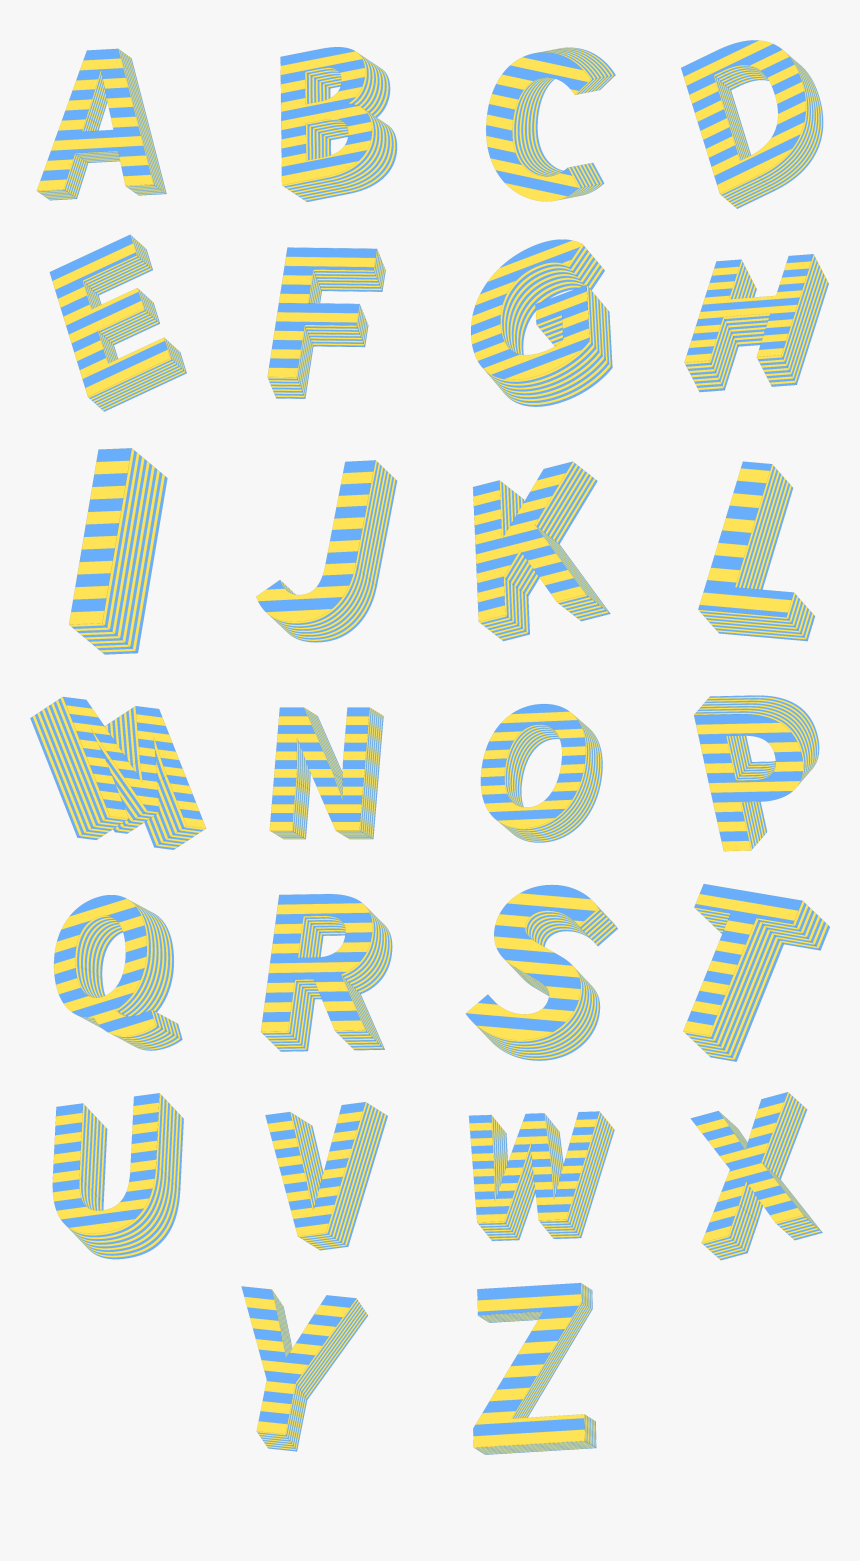 English Letters Pop Style 3d Stereo Art Font Set Image, HD Png Download, Free Download